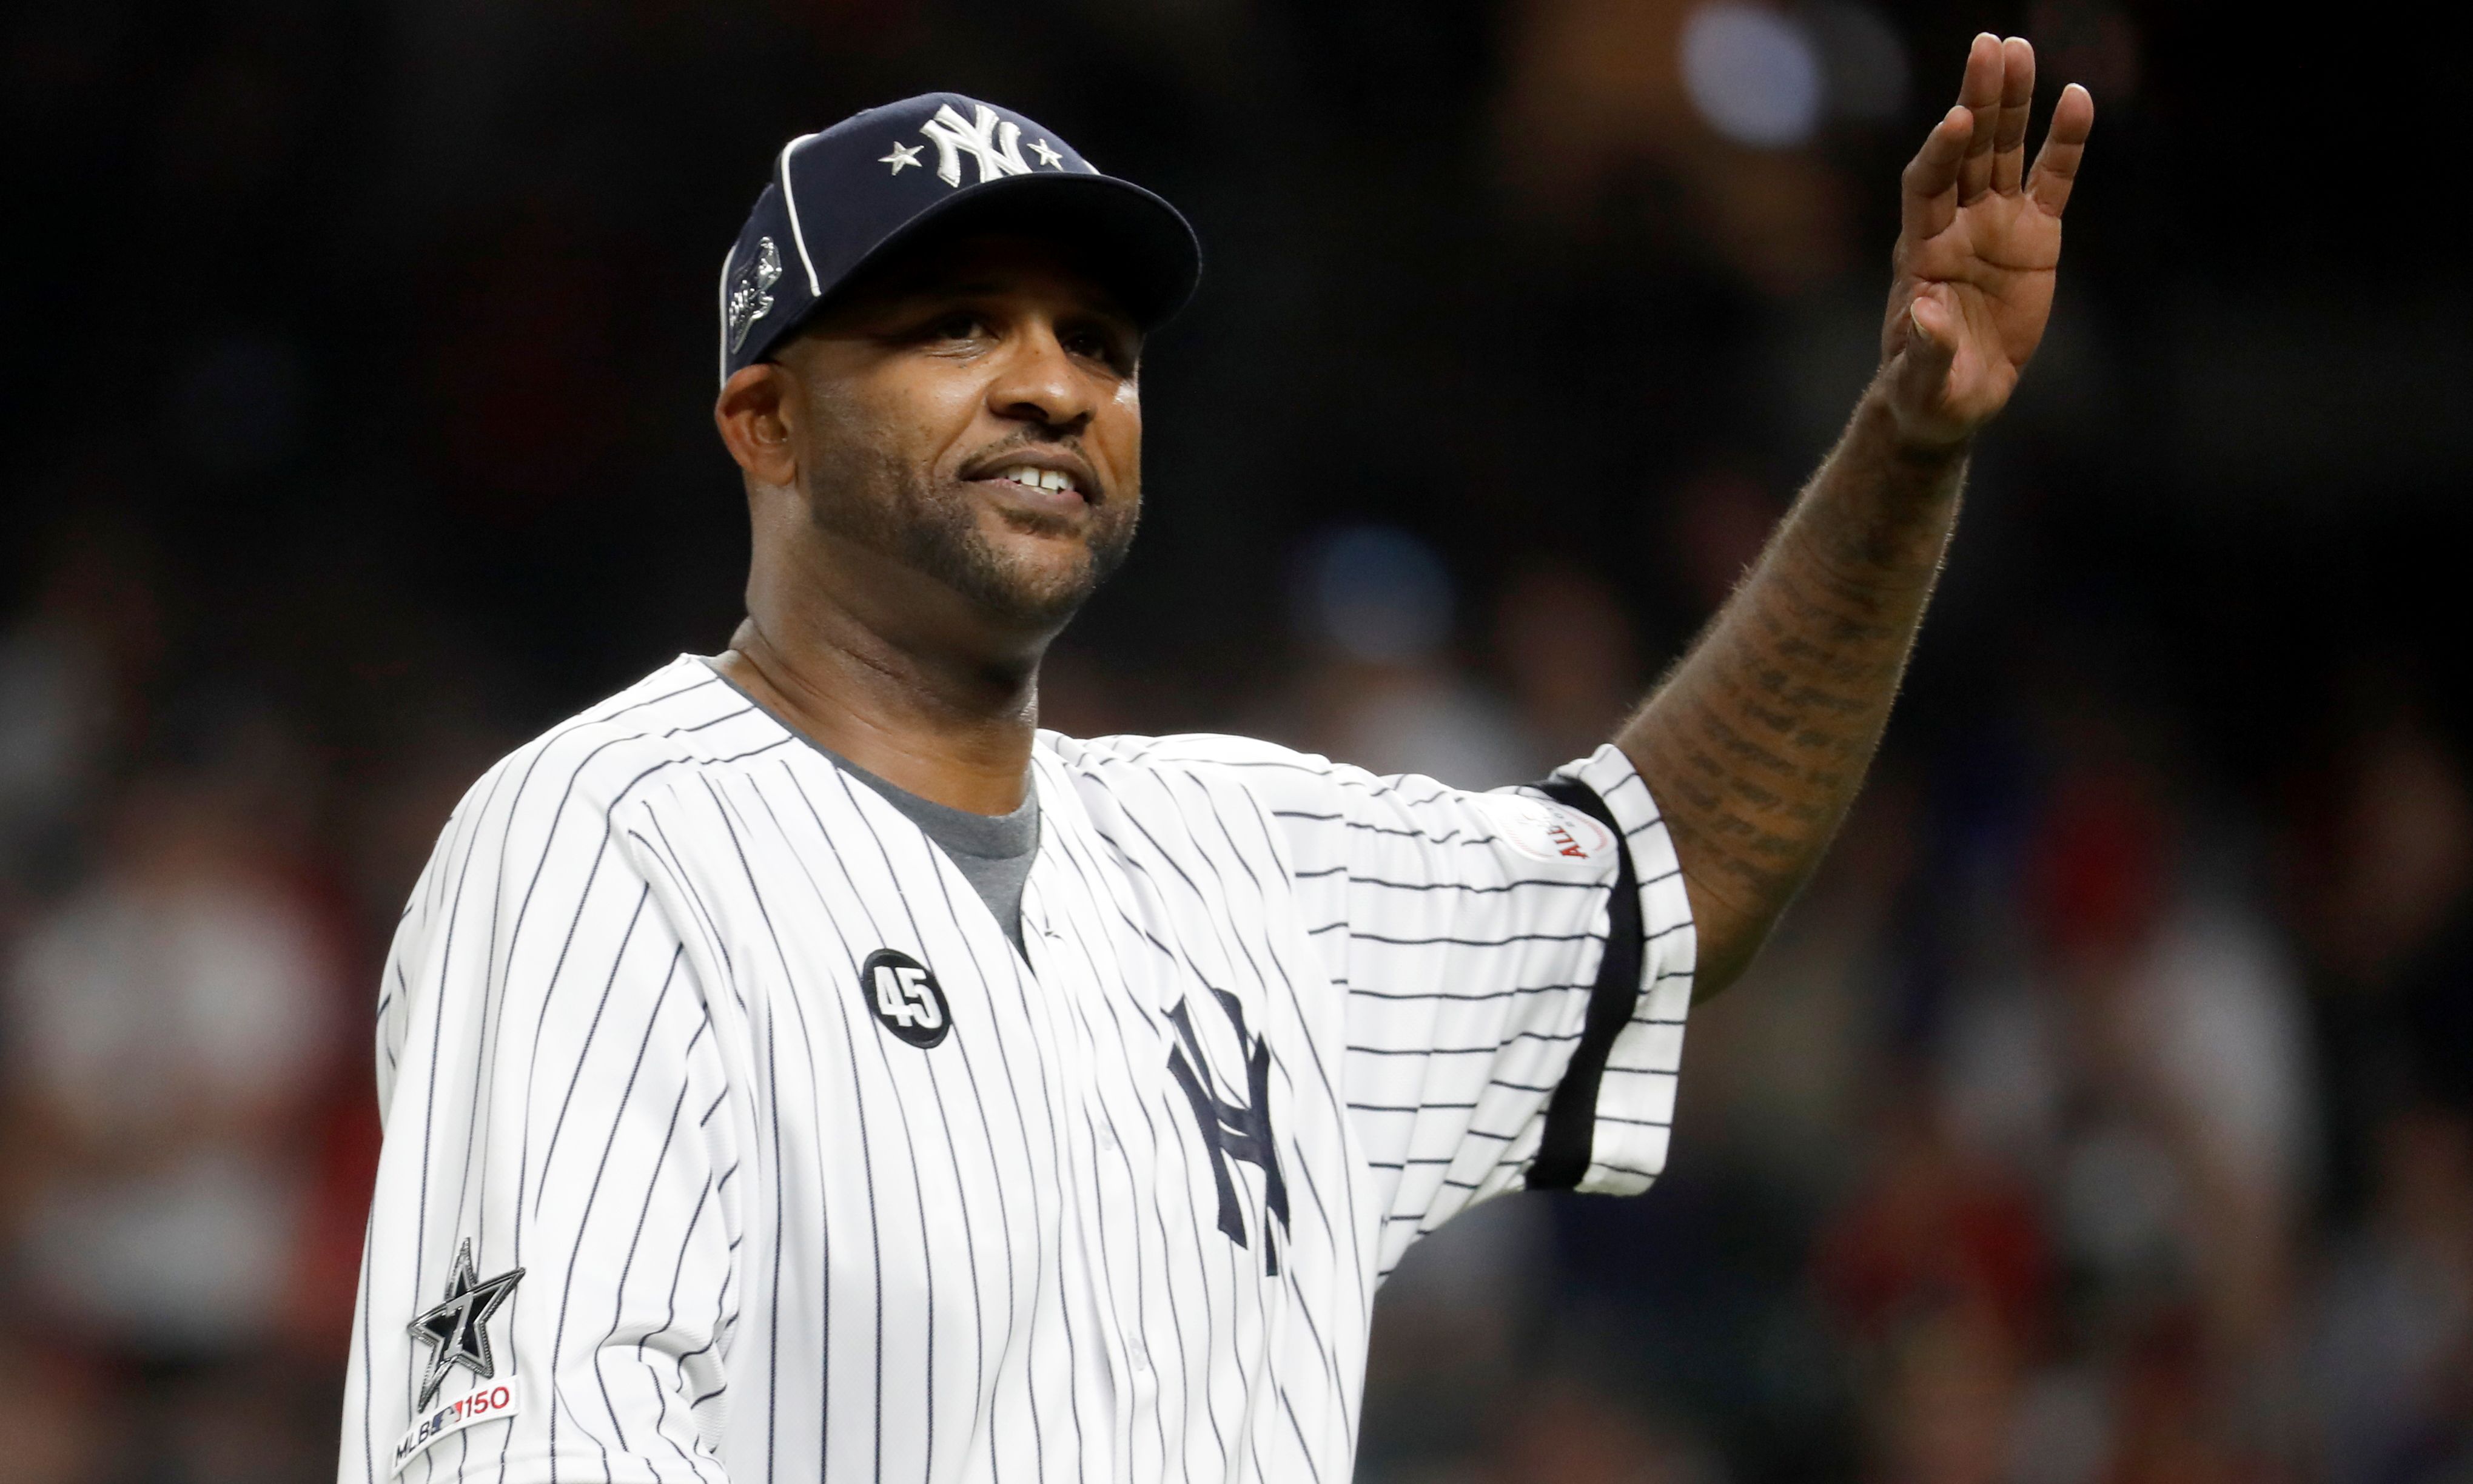 CC Sabathia to be honored at 2019 All-Star Game